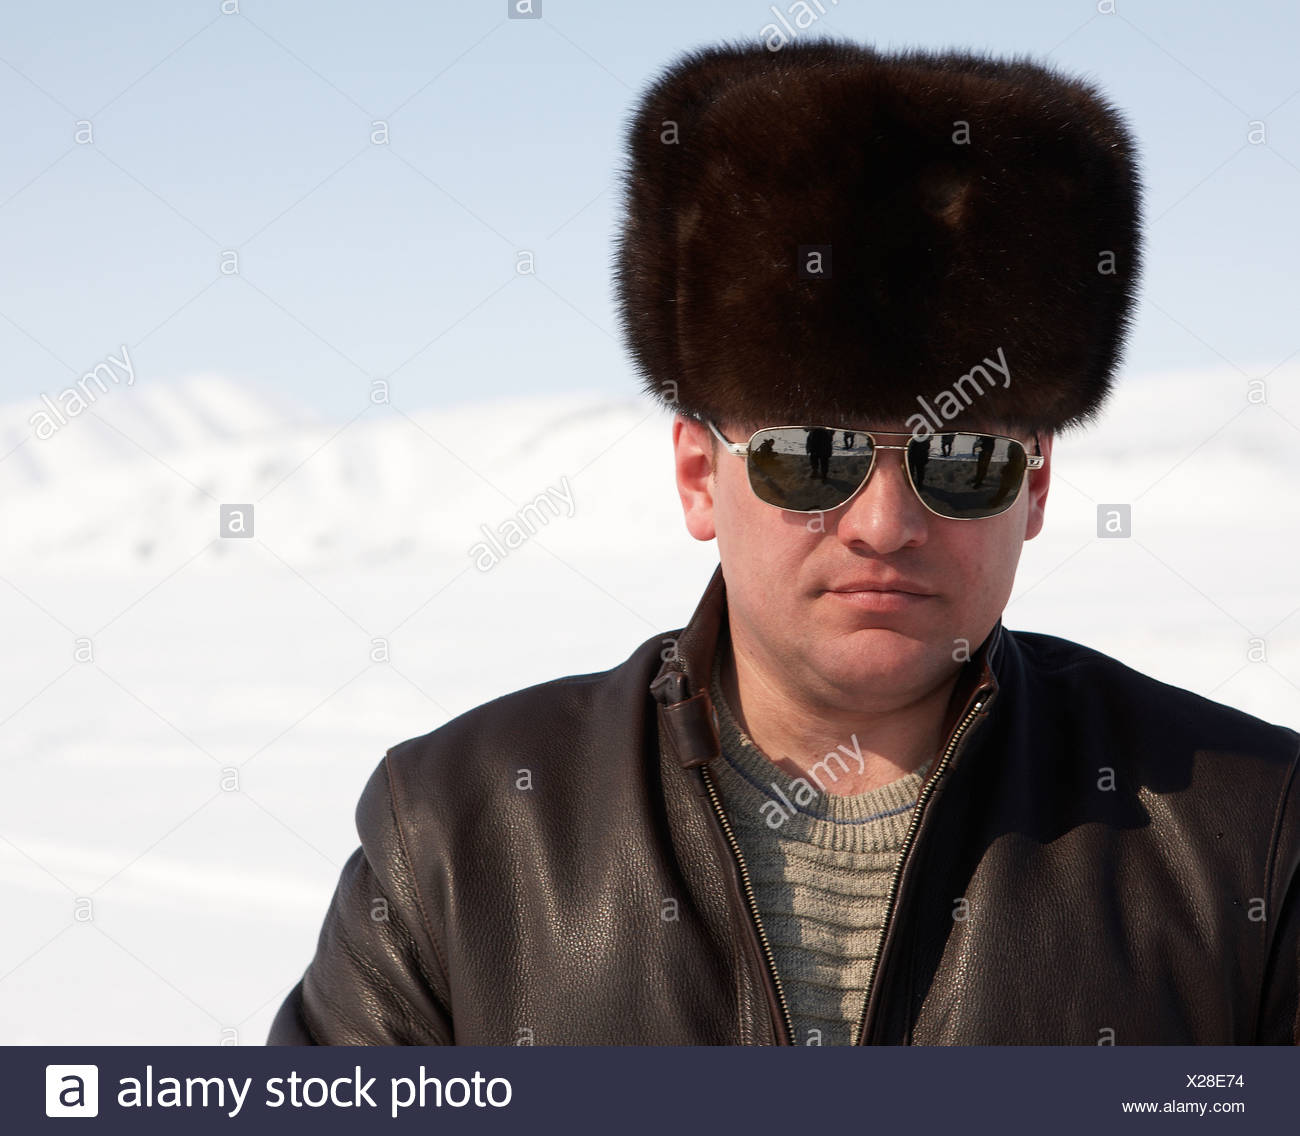 white fluffy russian hat